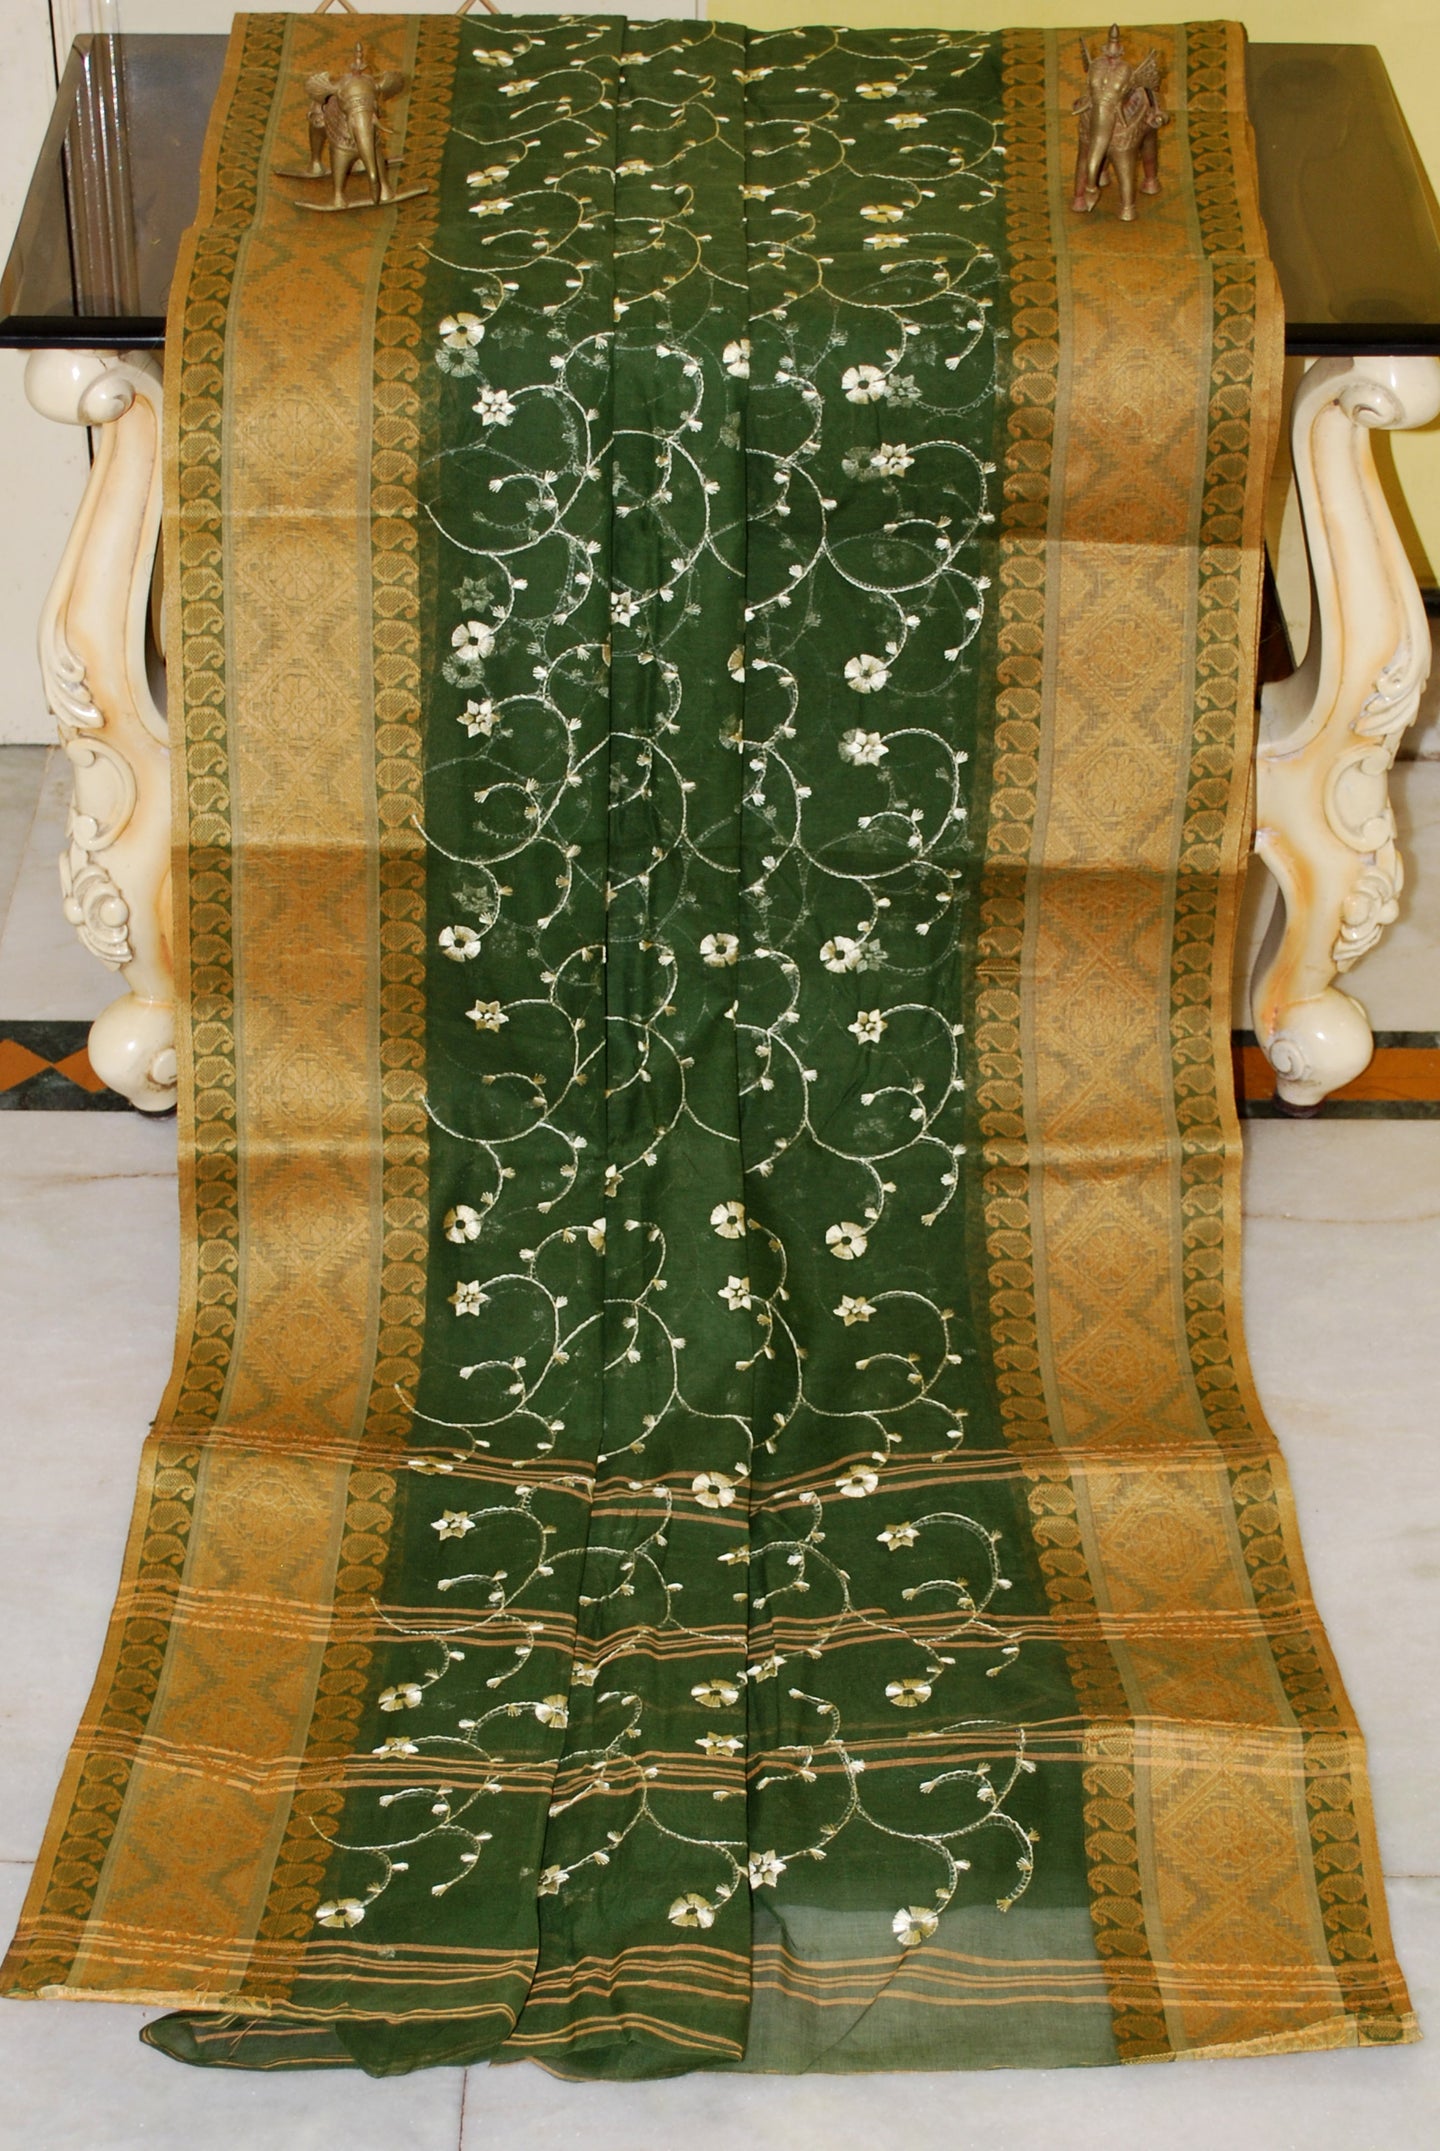 Bengal Handloom Cotton Saree with Floral Jaal Embroidery Work in Hunter Green, Biscotti and Off White